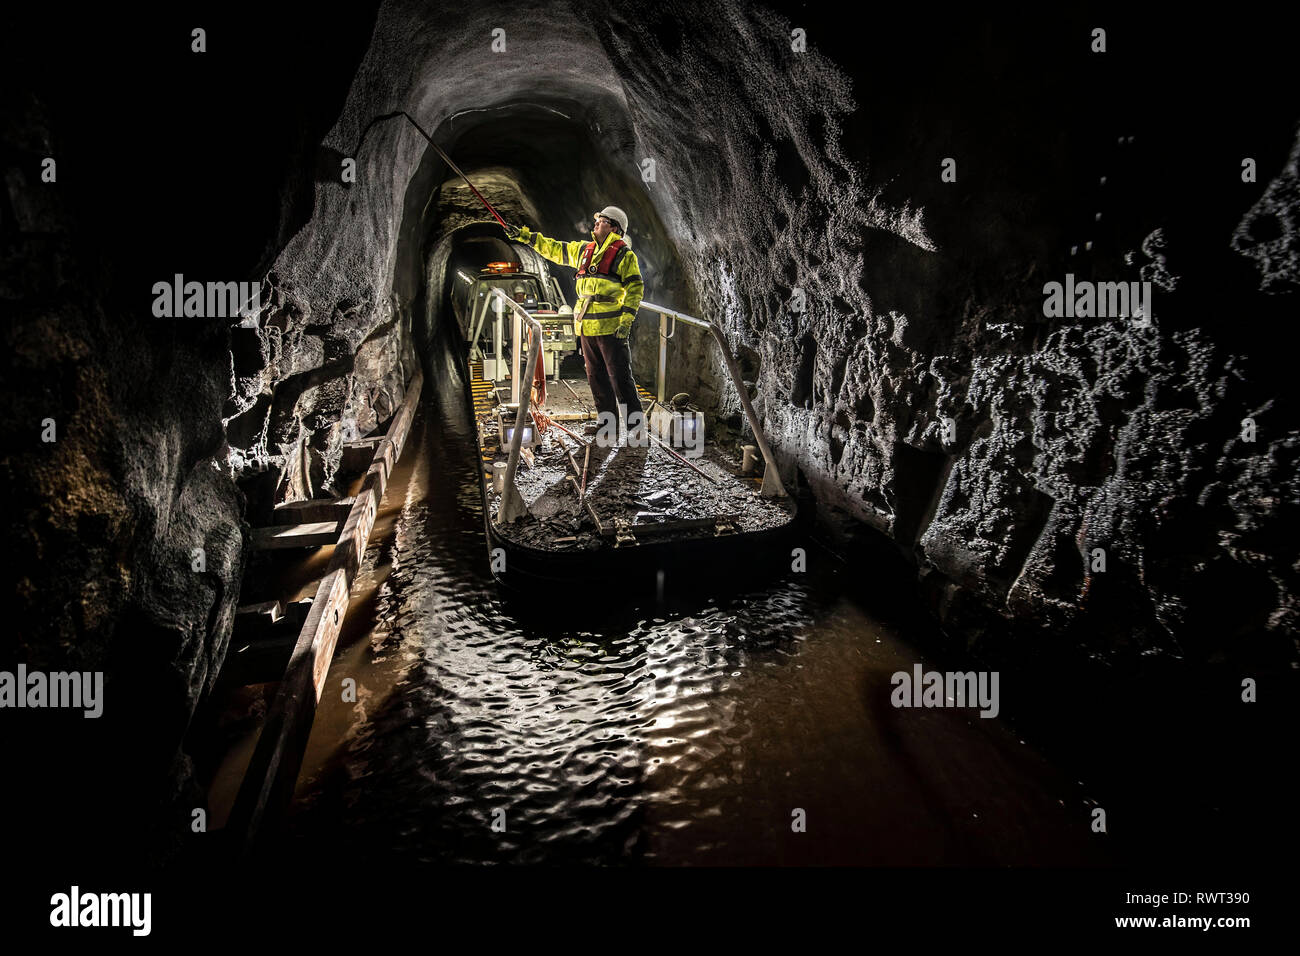 A member of the Canal & River Trust inspecting the Standedge Tunnel on the Huddersfield Narrow Canal. Stock Photo